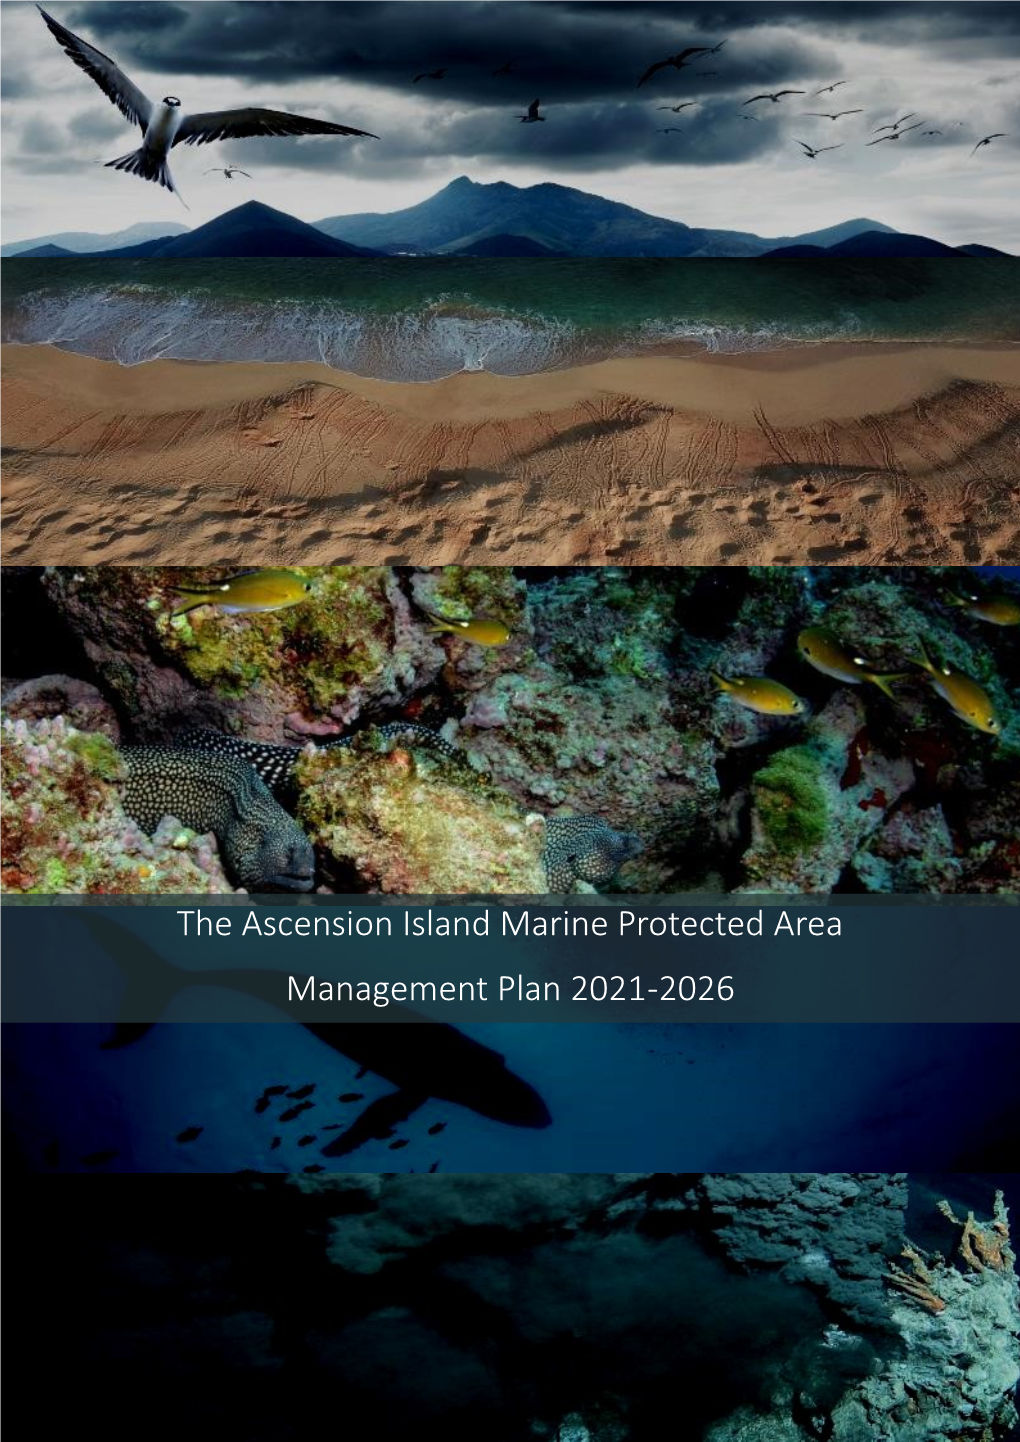 The Ascension Island Marine Protected Area Management Plan 2021-2026